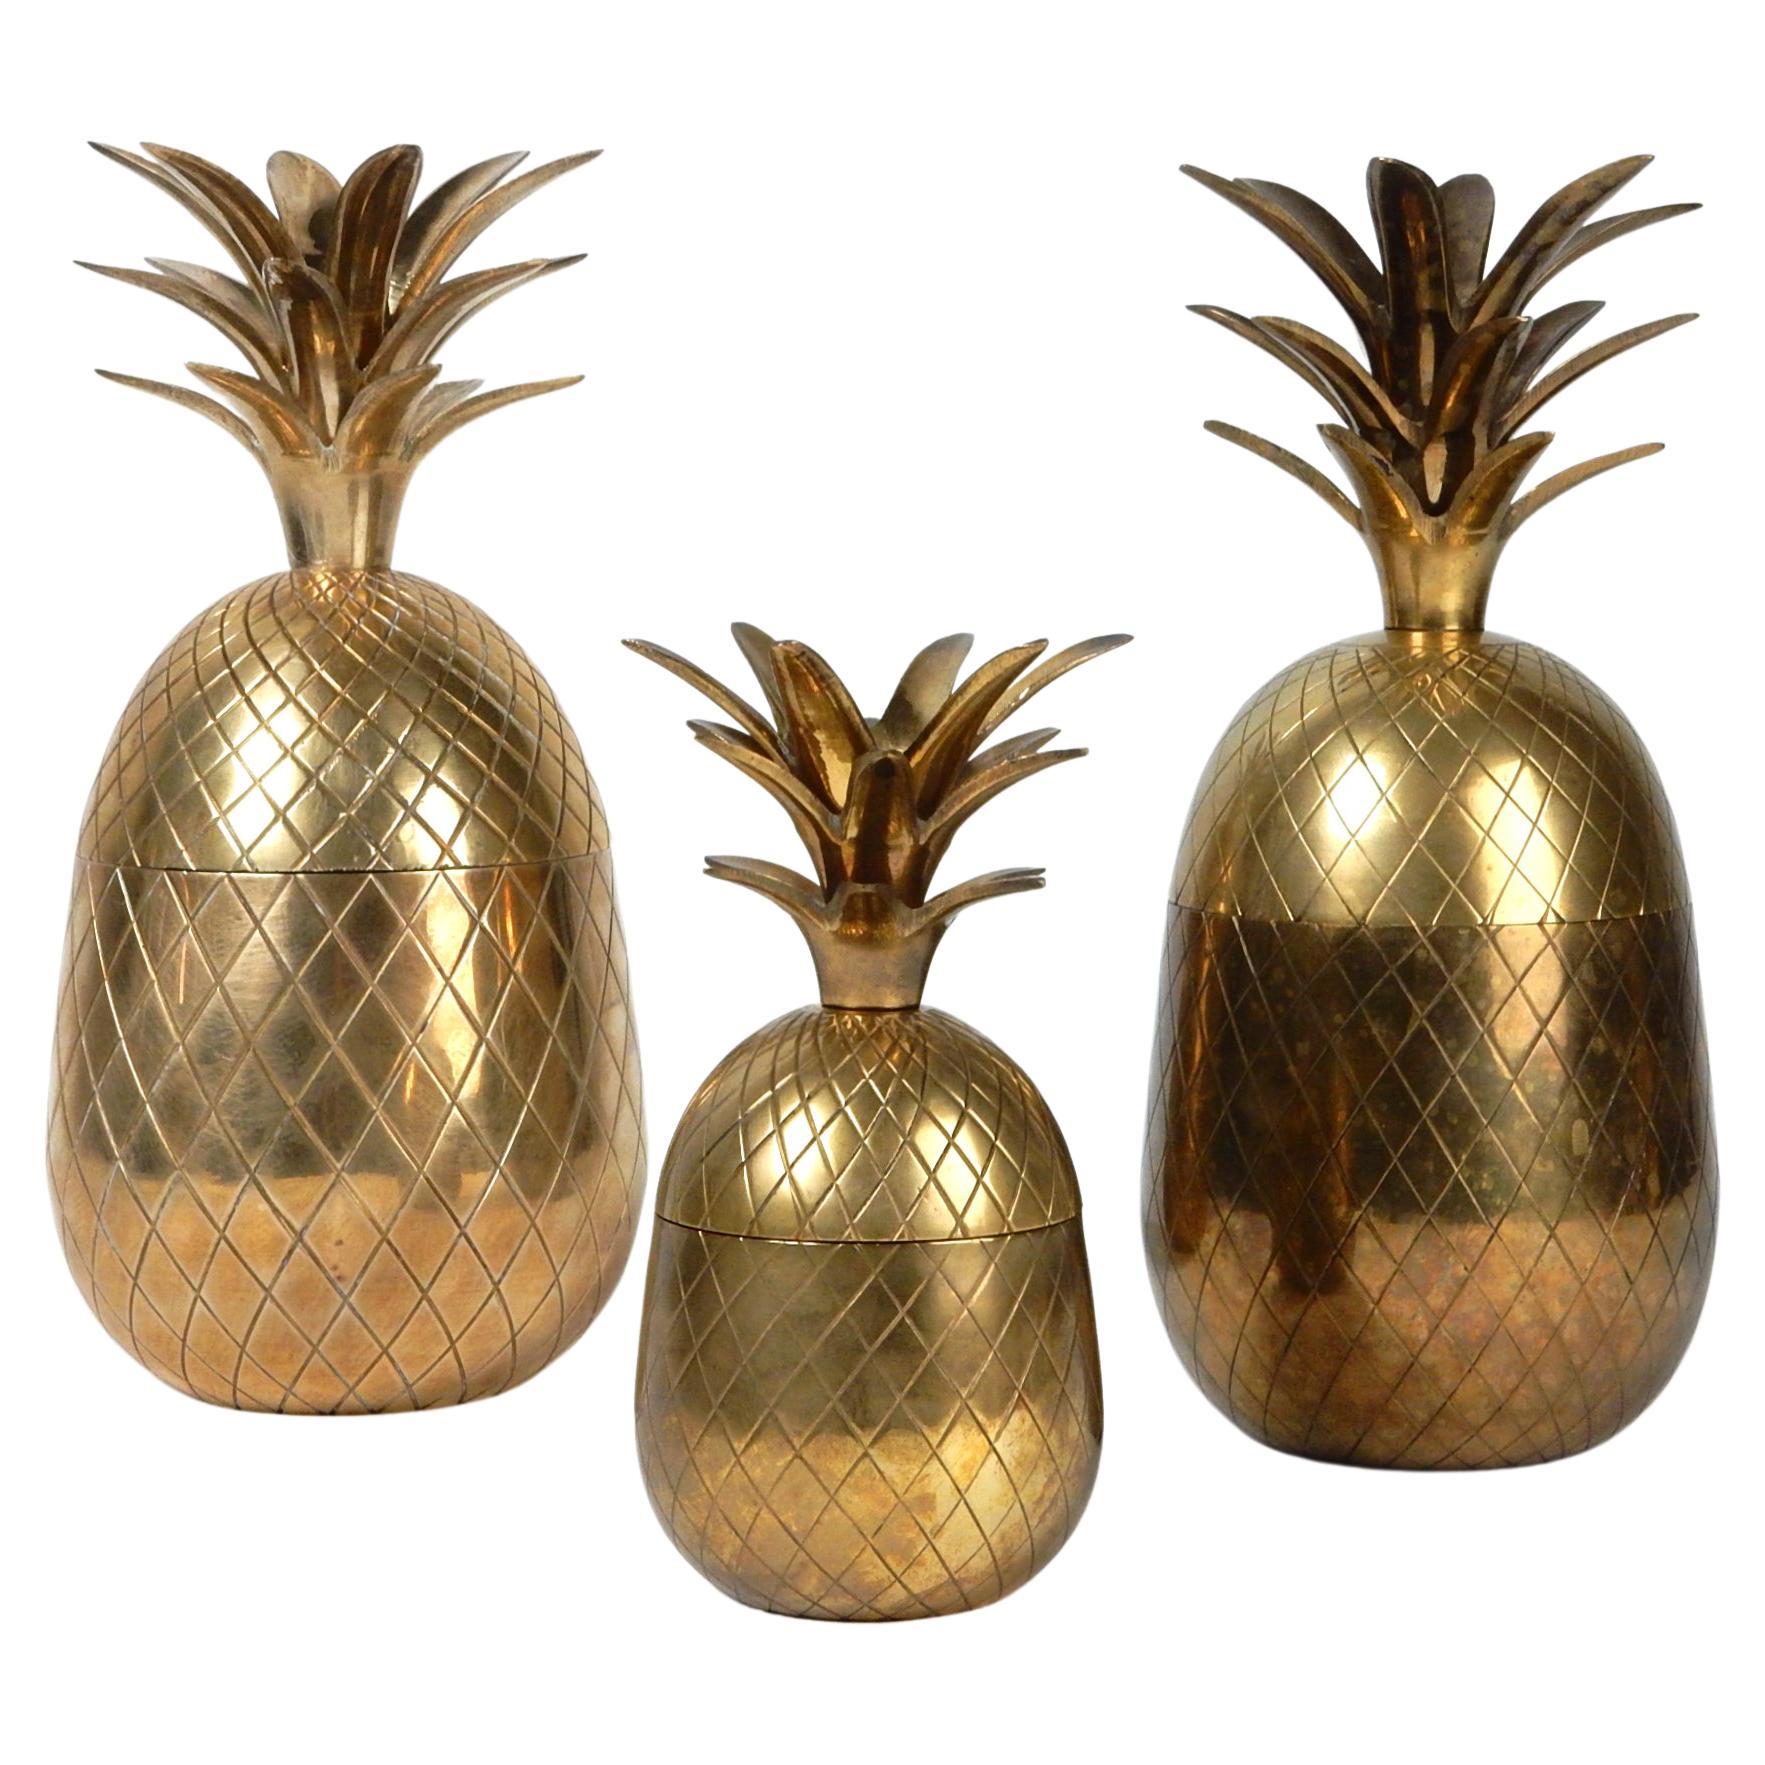 Perfect table centerpiece! 
A set of three vintage chiseled brass pineapple sculpture boxes.
Tallest is 12